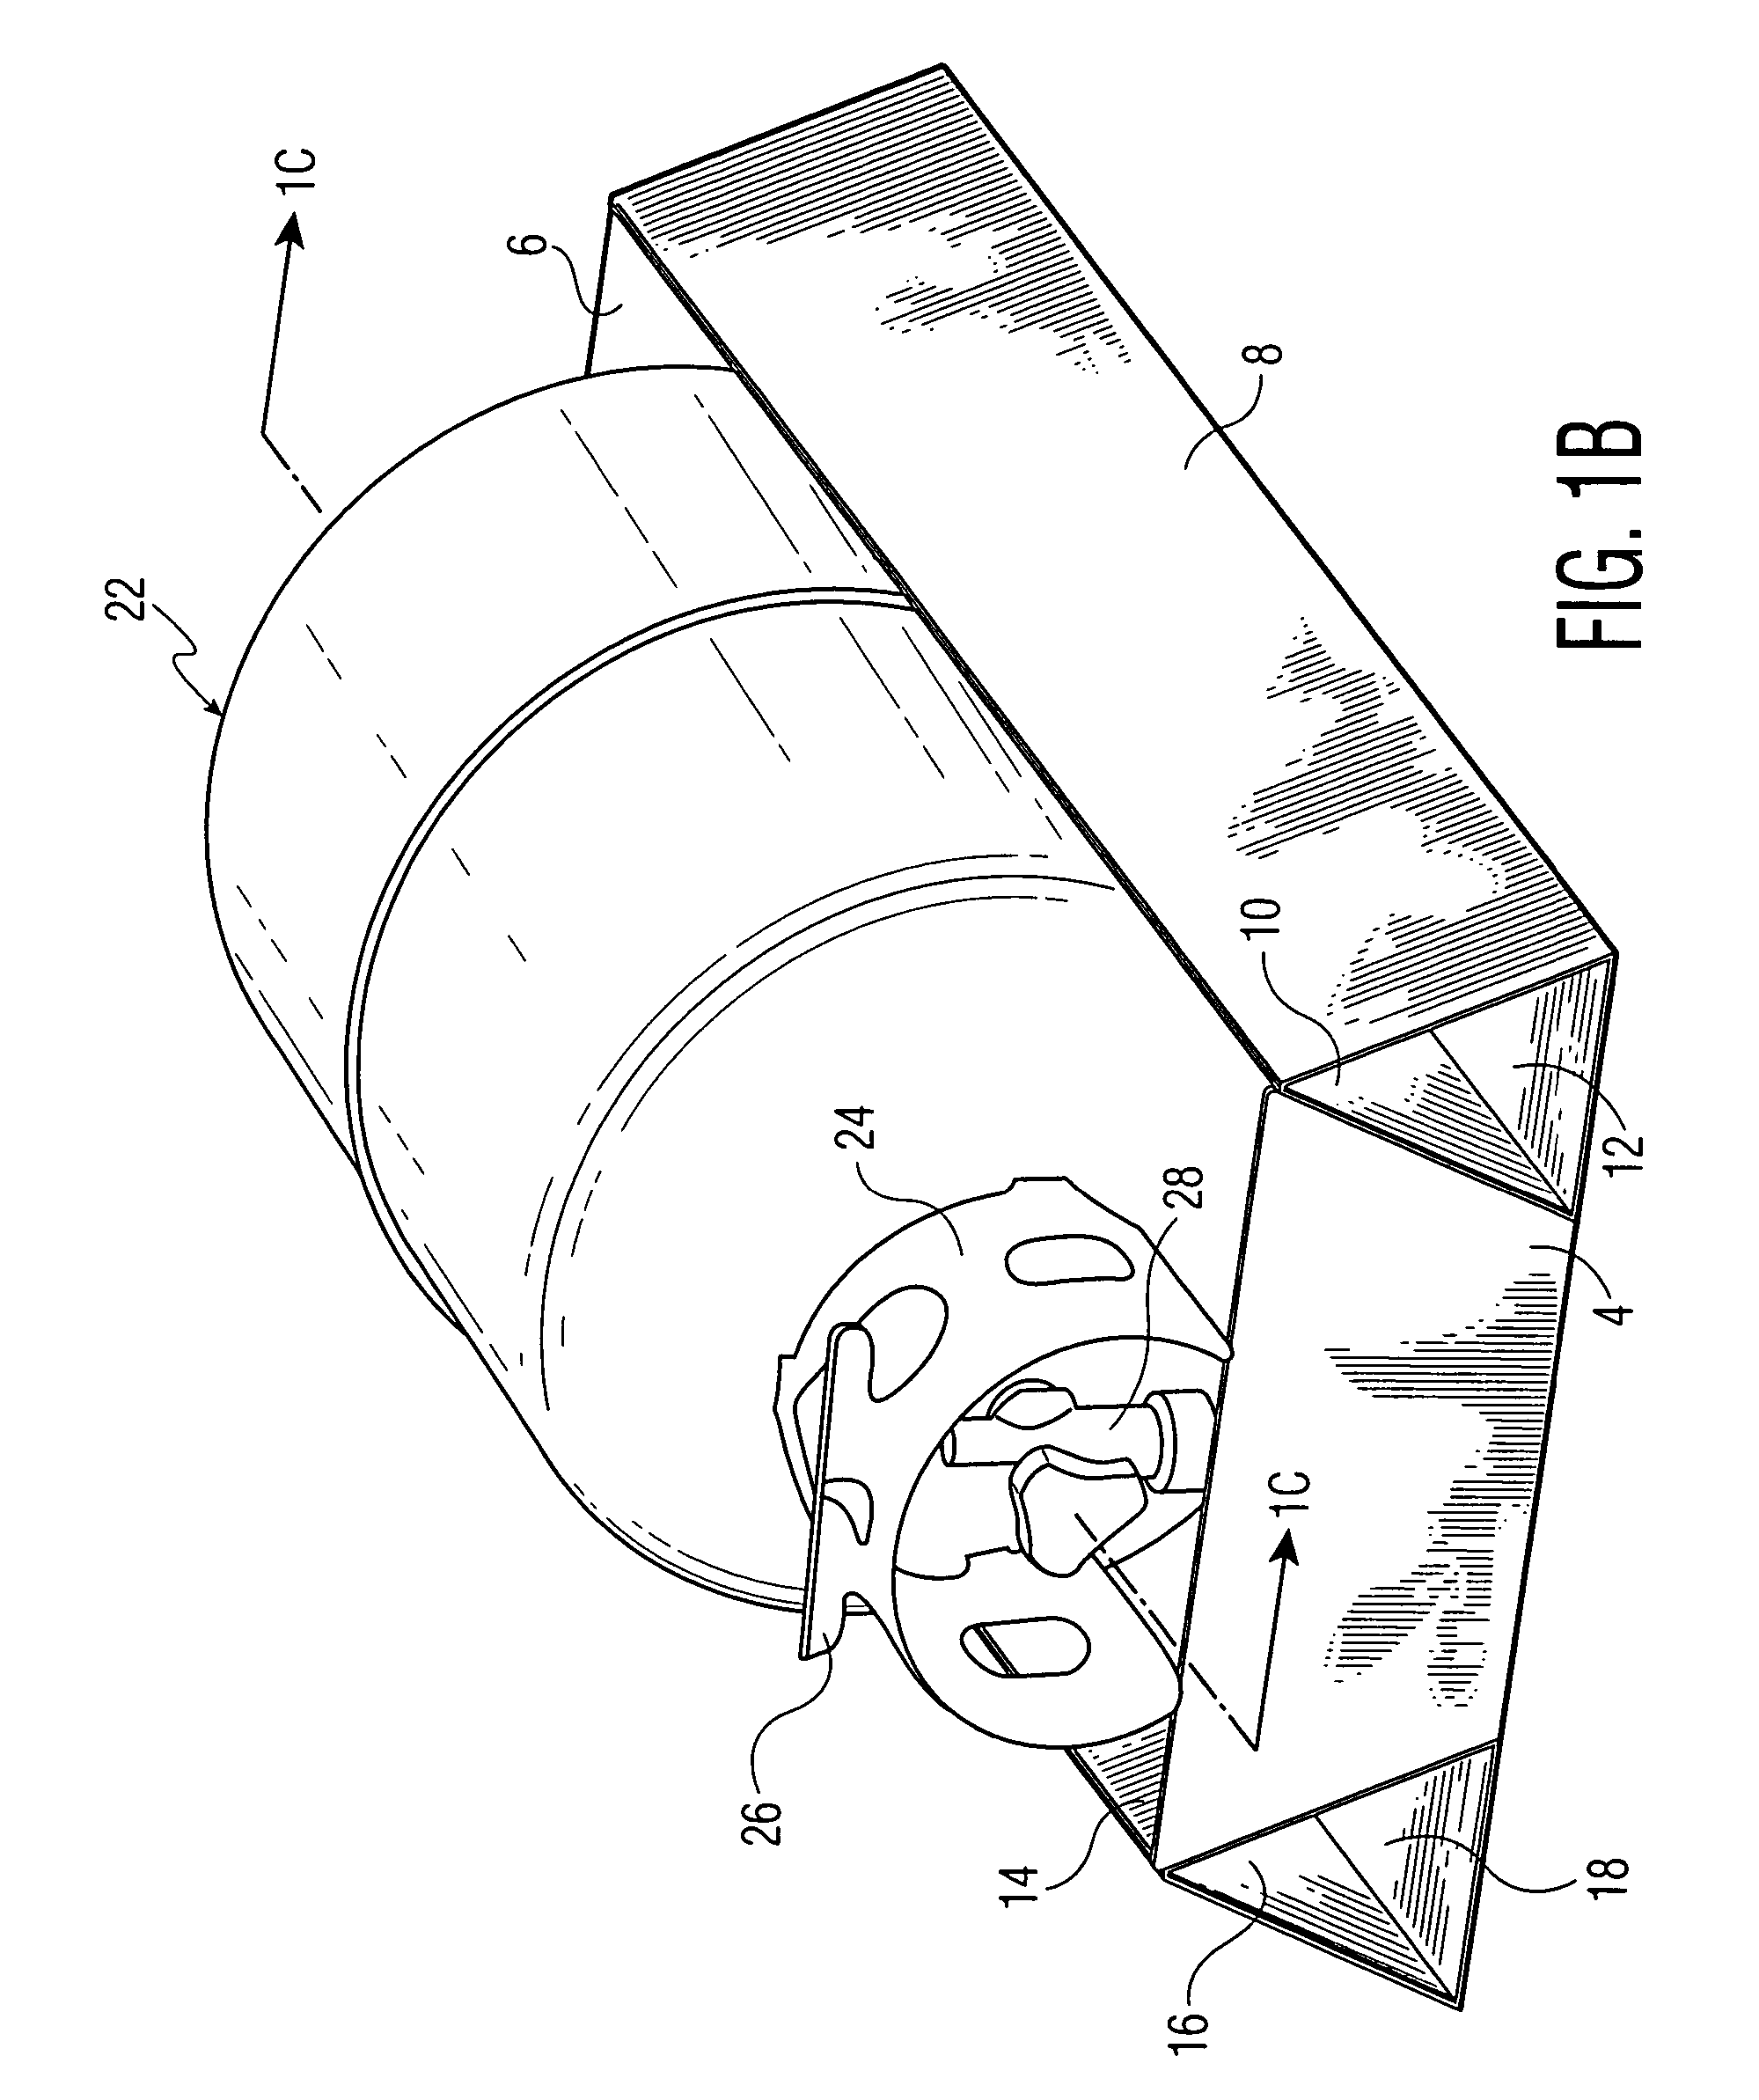 Carrier for transporting a cylindrical tank in a horizontal orientation